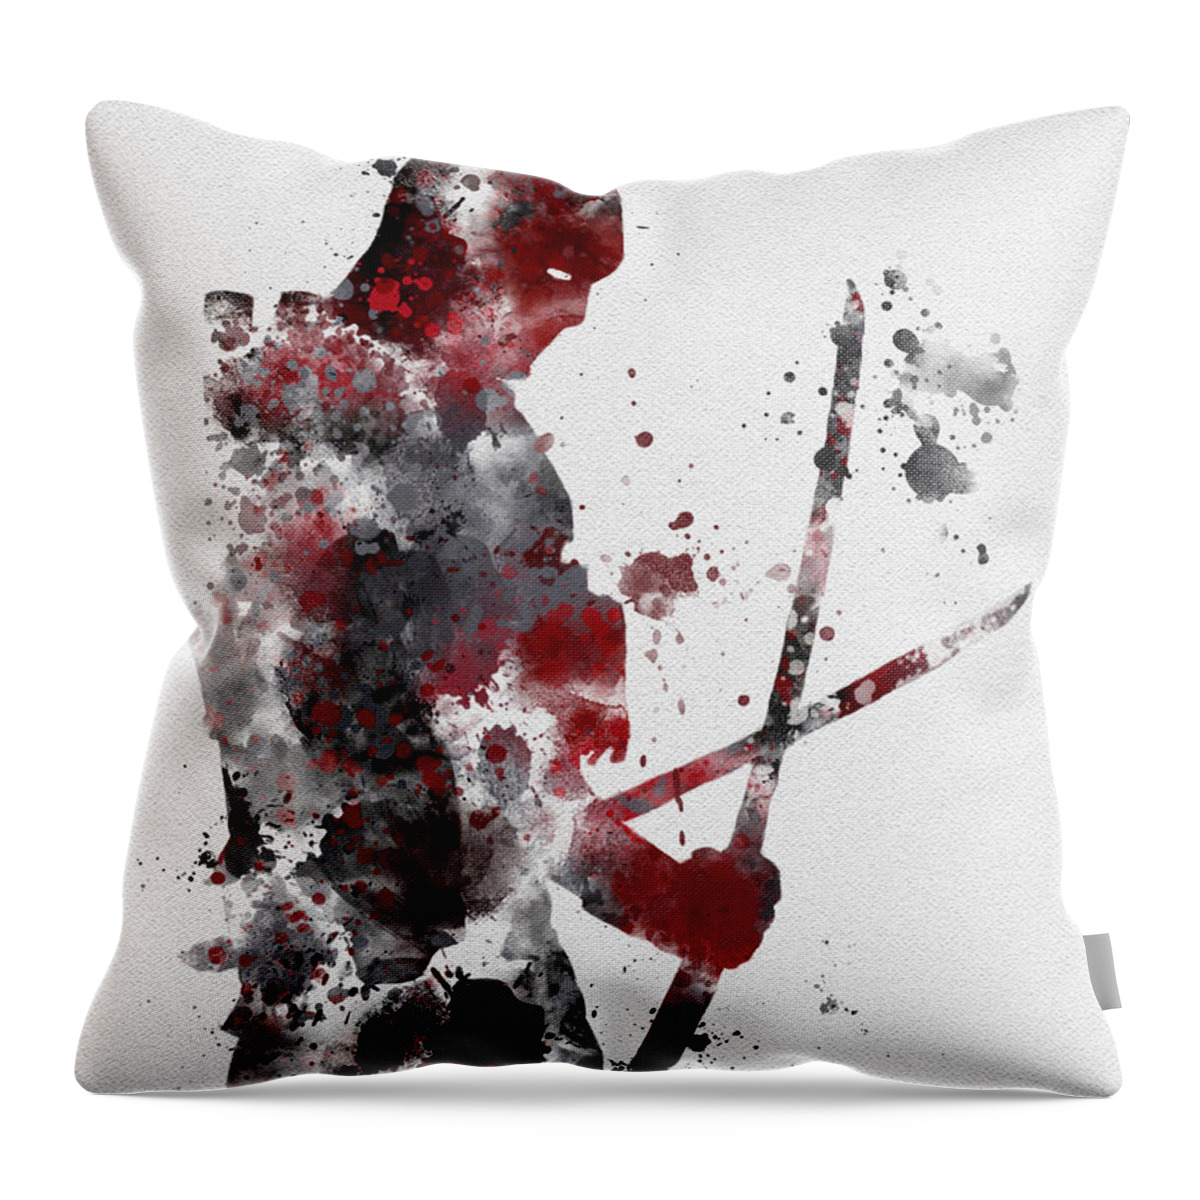 Deadpool Throw Pillow featuring the mixed media Deadpool by My Inspiration